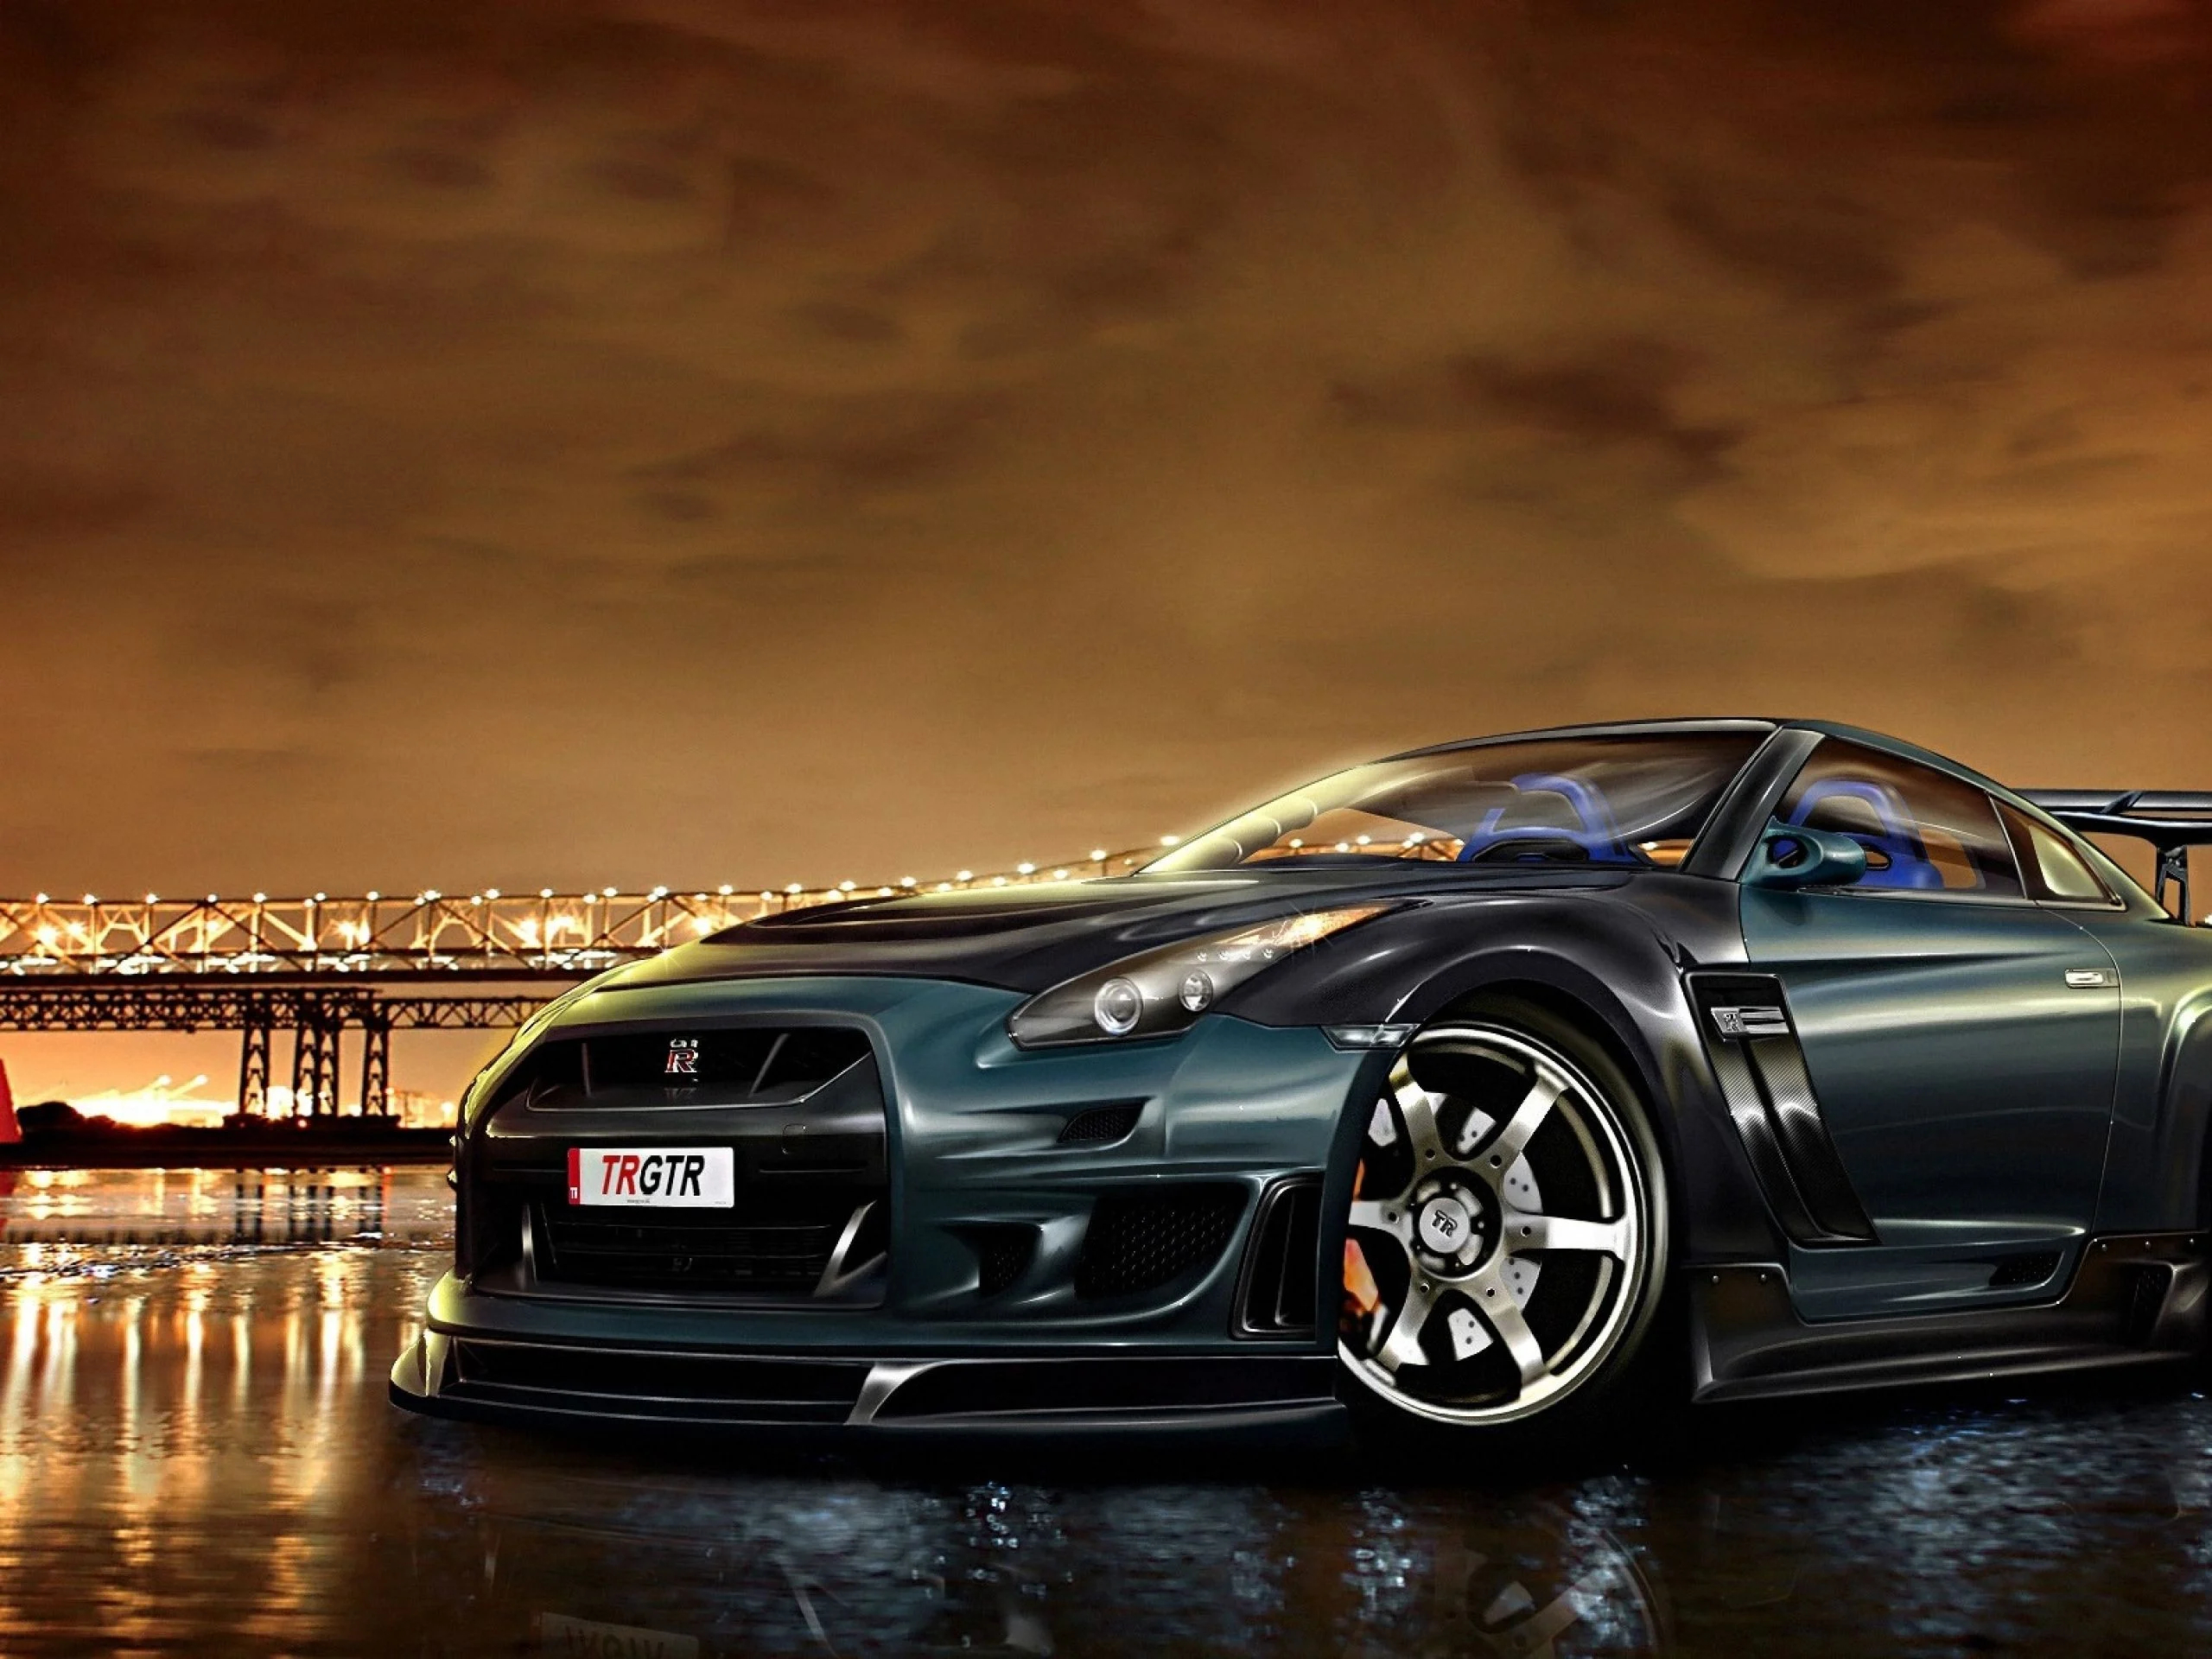 2560x1920 GTR Sports Car Wallpapers Top Free GTR Sports Car Backgrounds